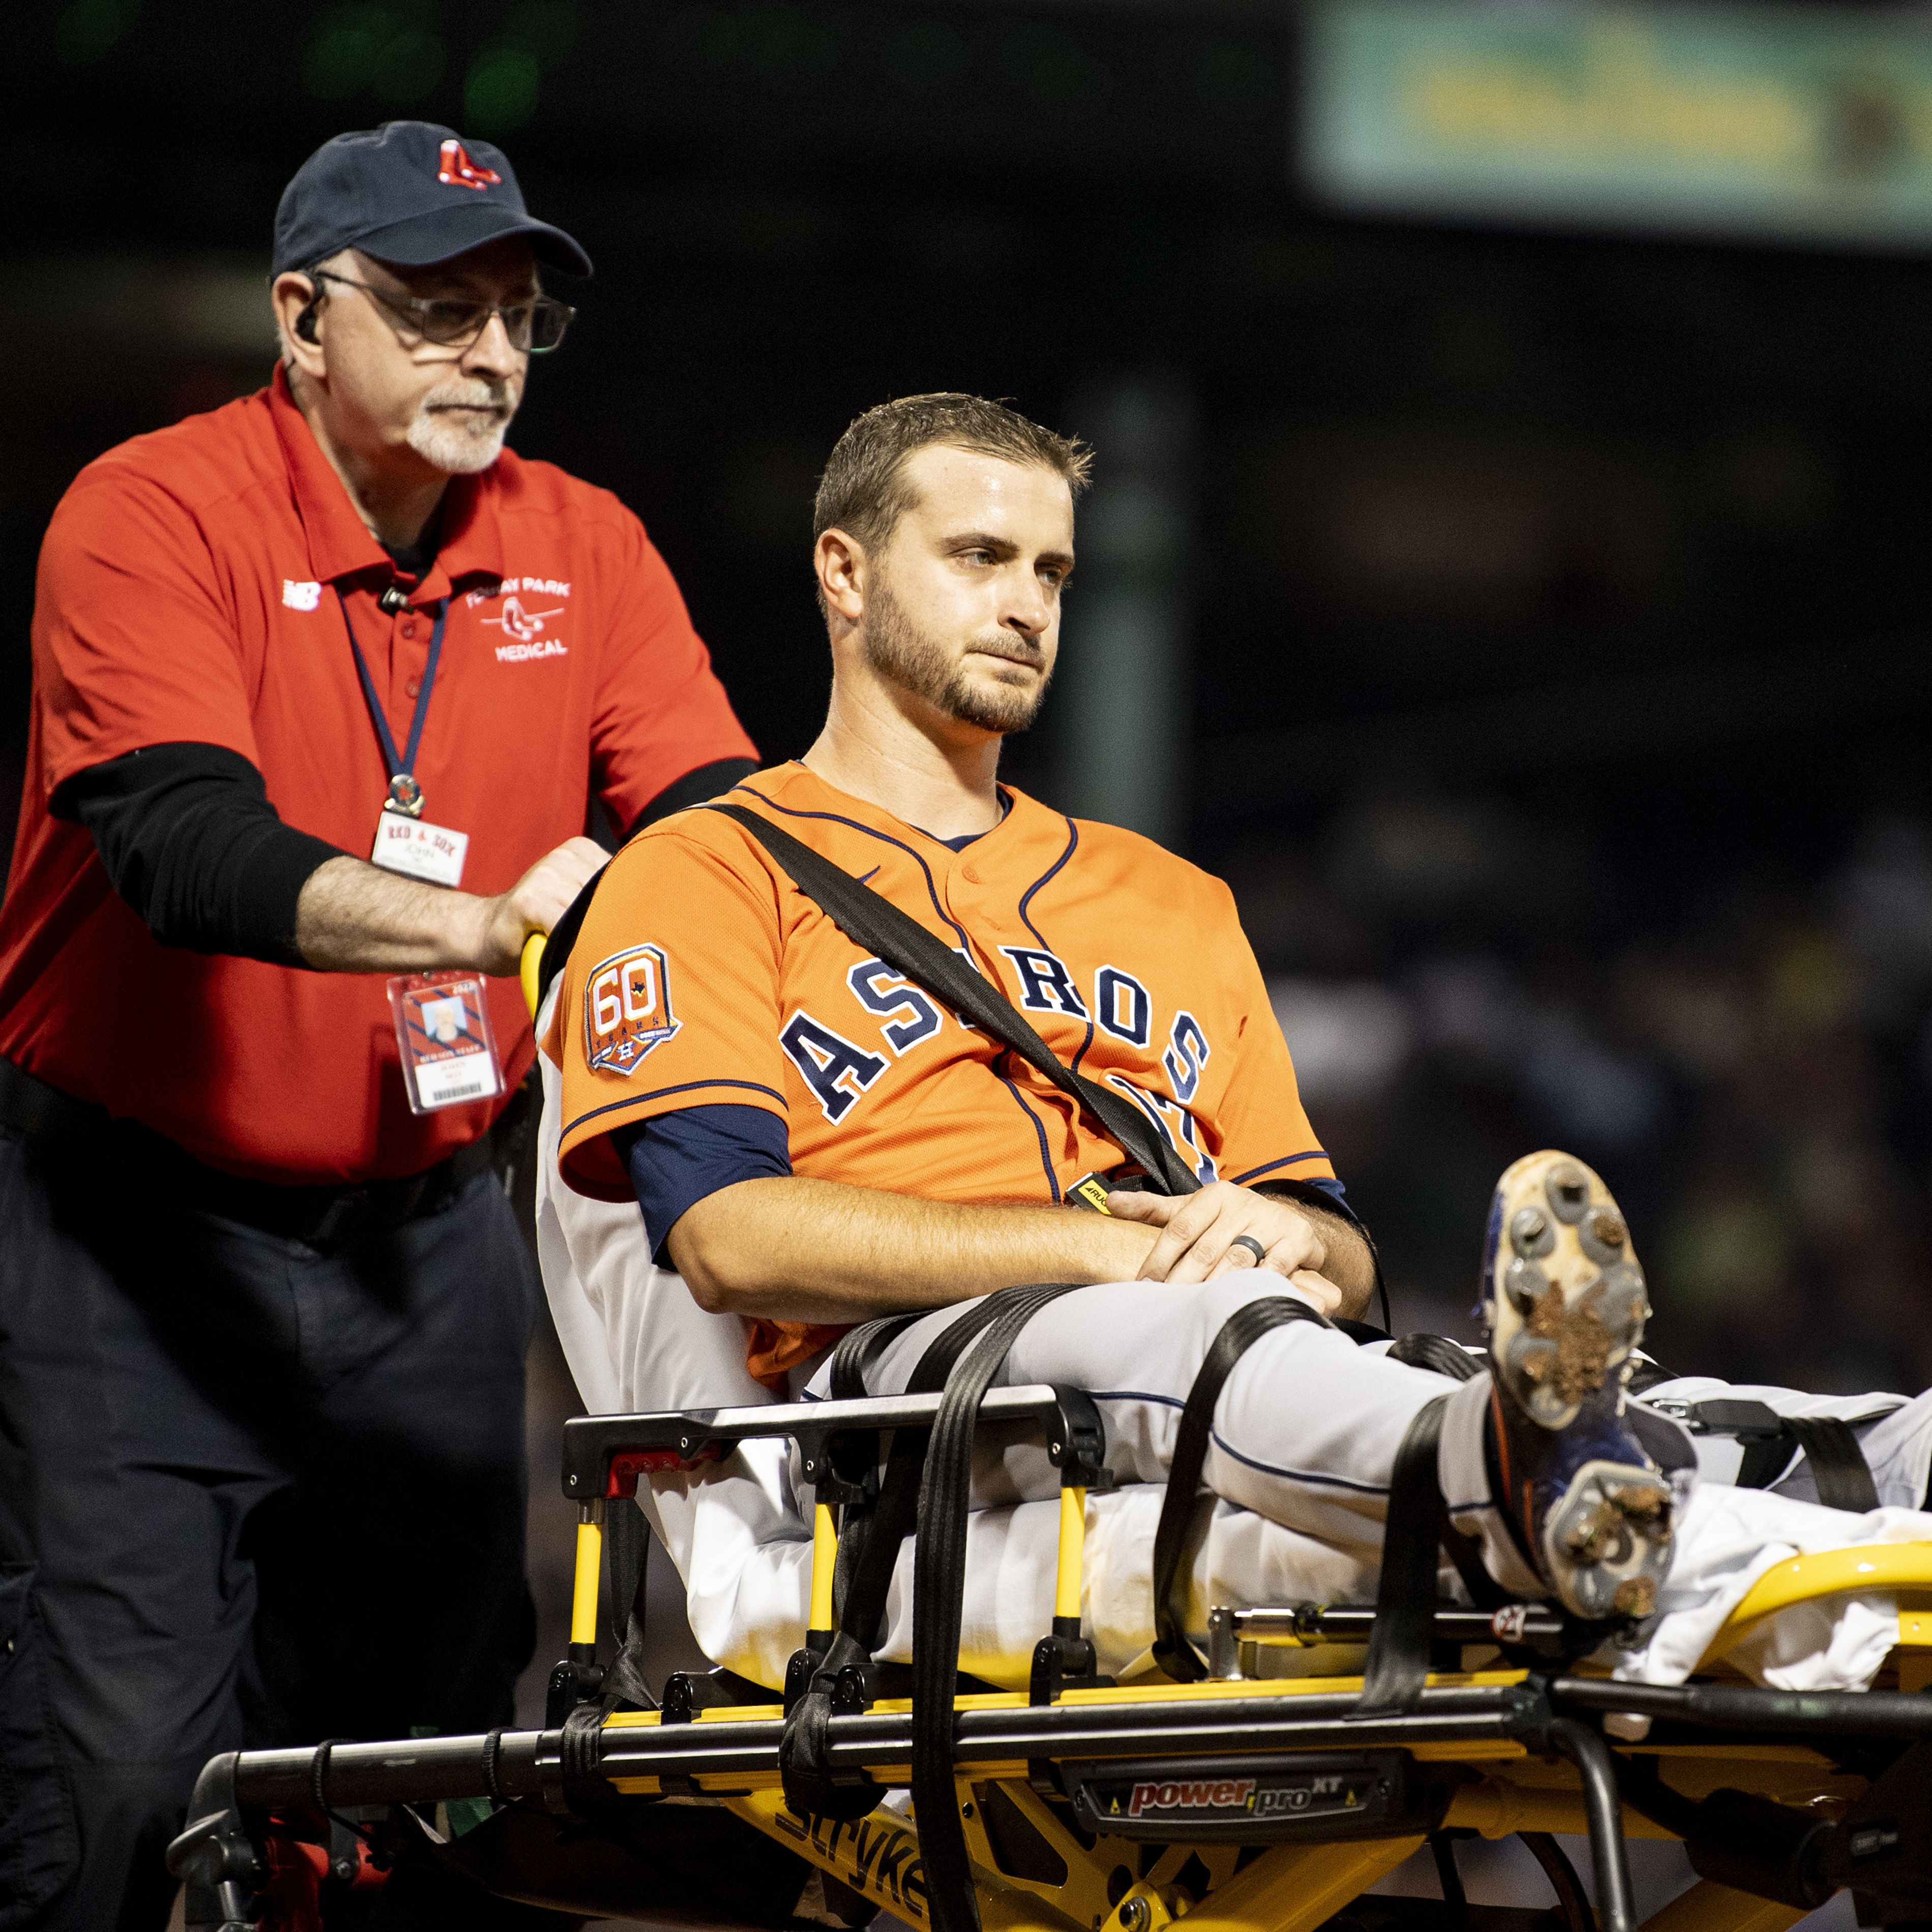 Astros’ Jake Odorizzi Carted Off After Suffering Lower Leg Injury vs. Red Sox